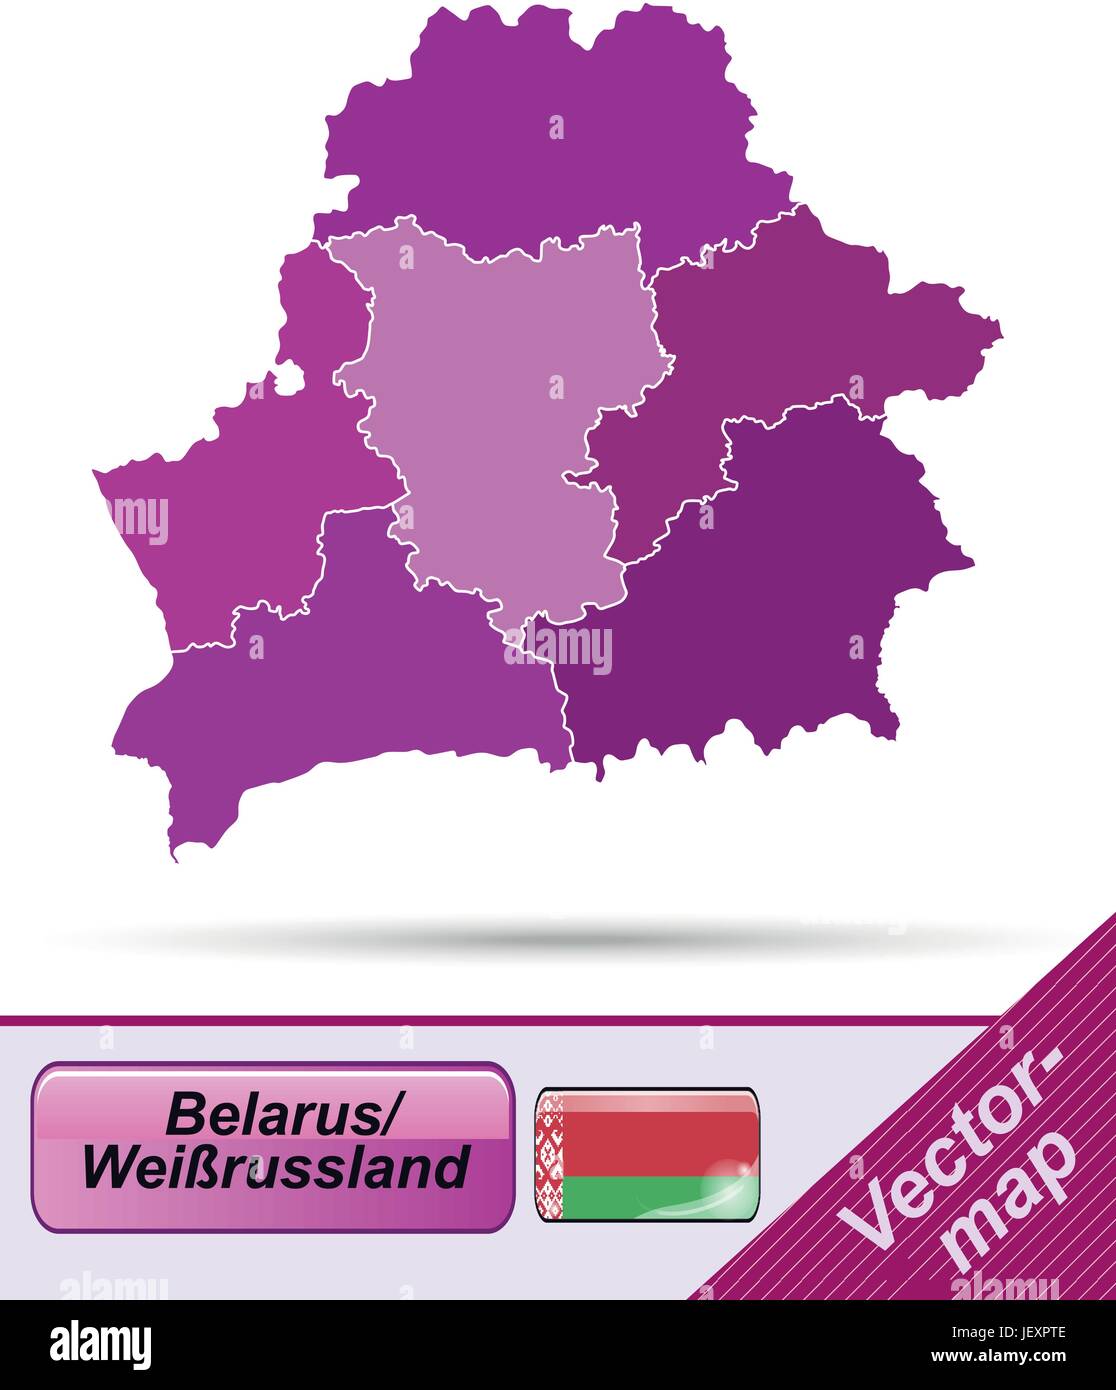 boundary map of belarus with borders in violet Stock Vector